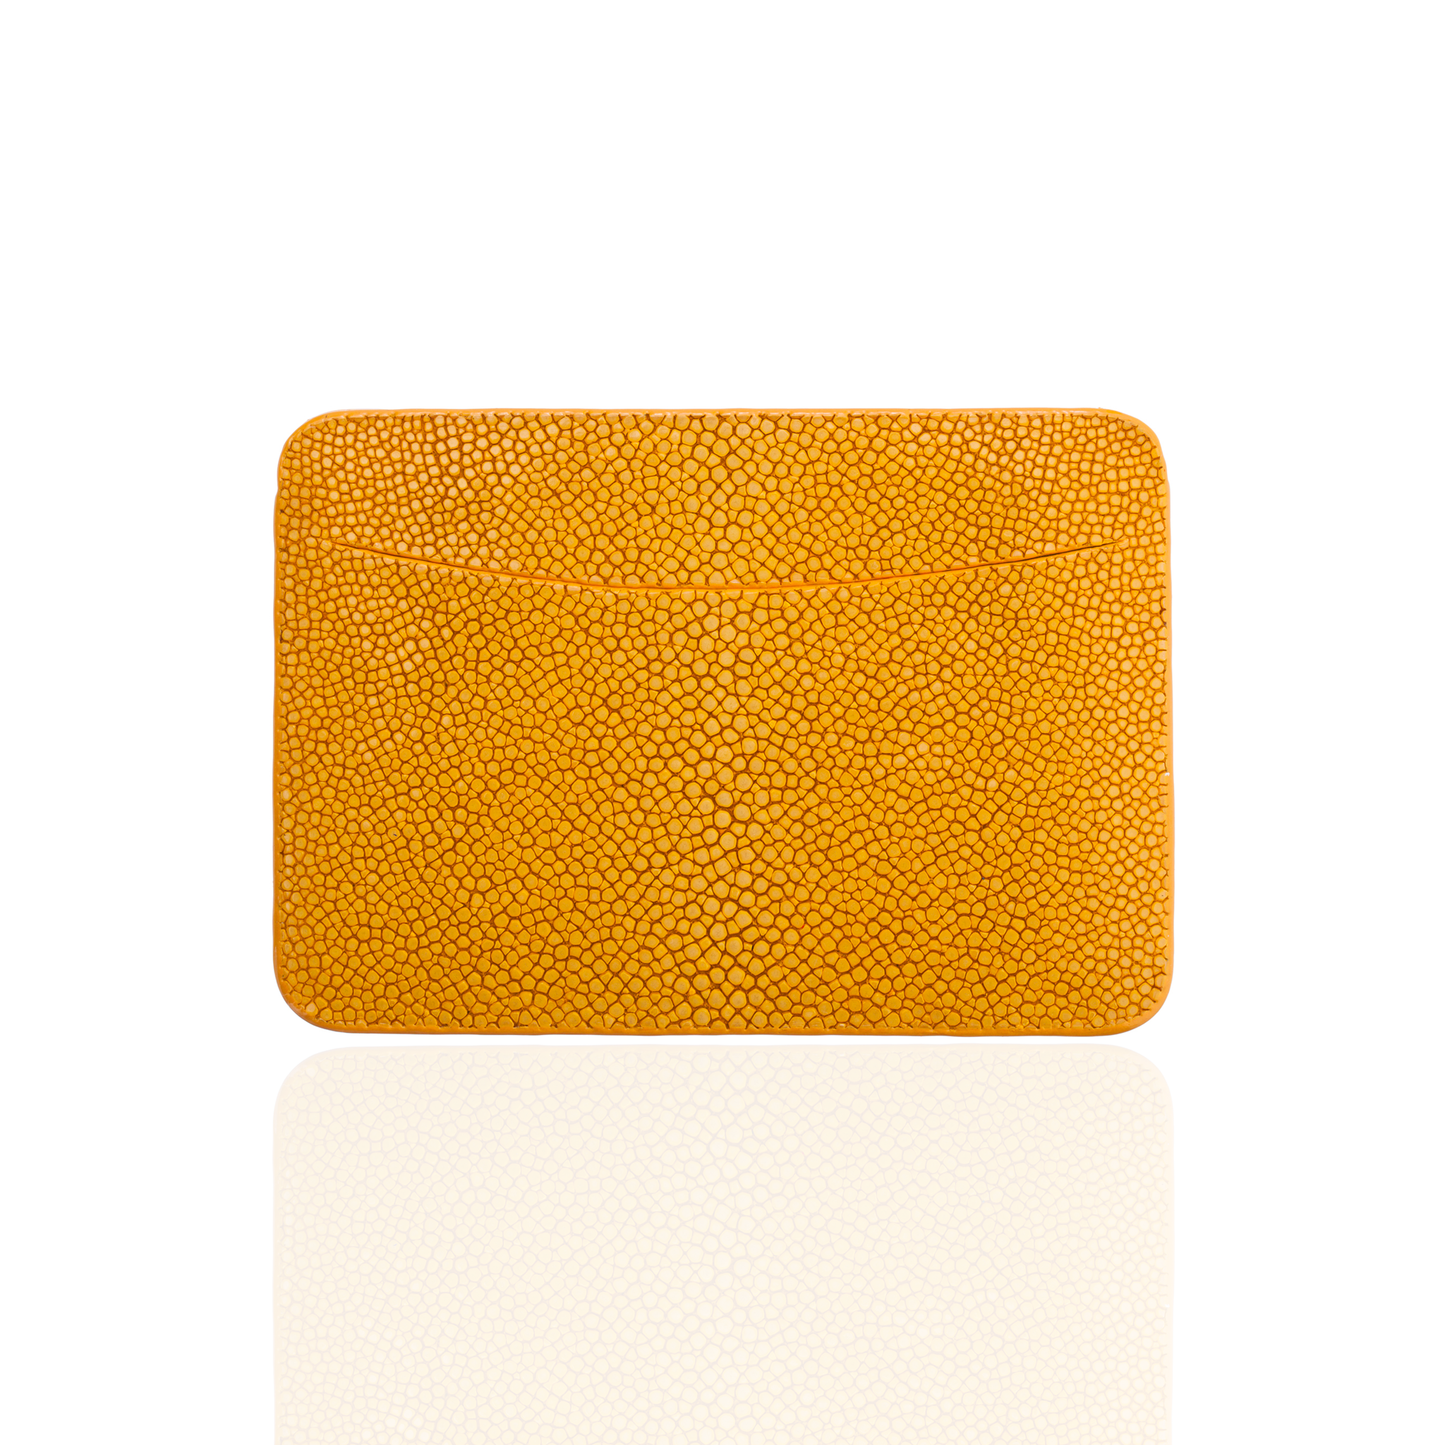 Load image into Gallery viewer, Credit Card Pouch in Yellow Stingray Leather
